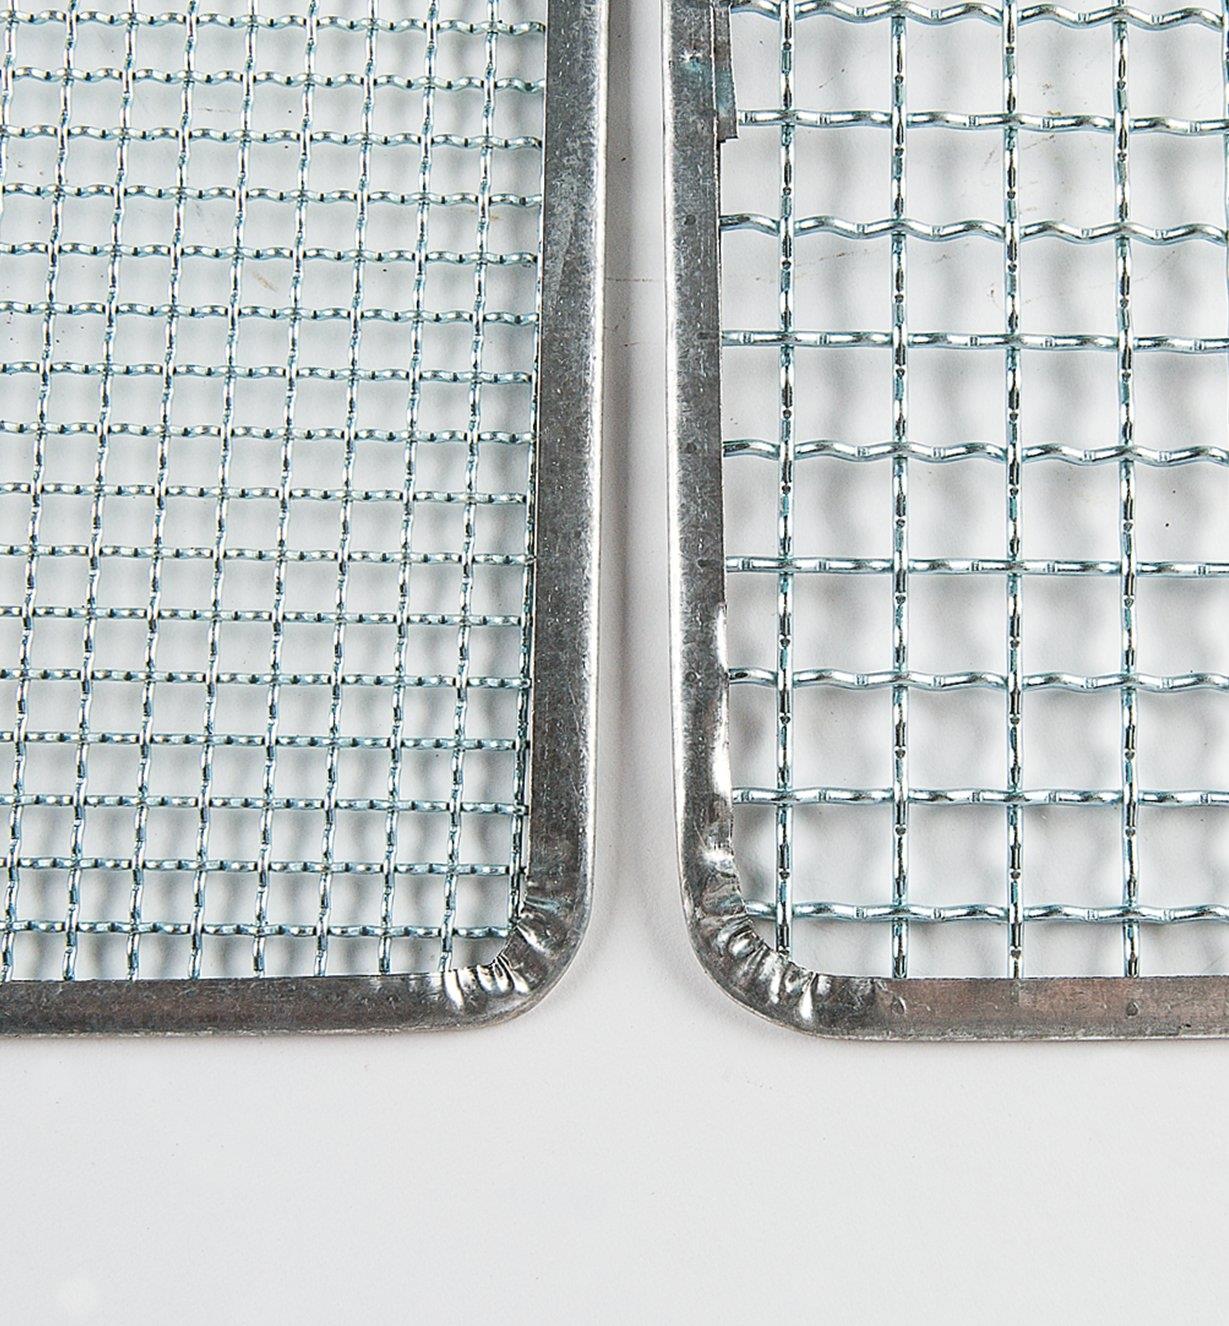 Close-up of 6mm (1/4") mesh and 12mm (1/2") mesh